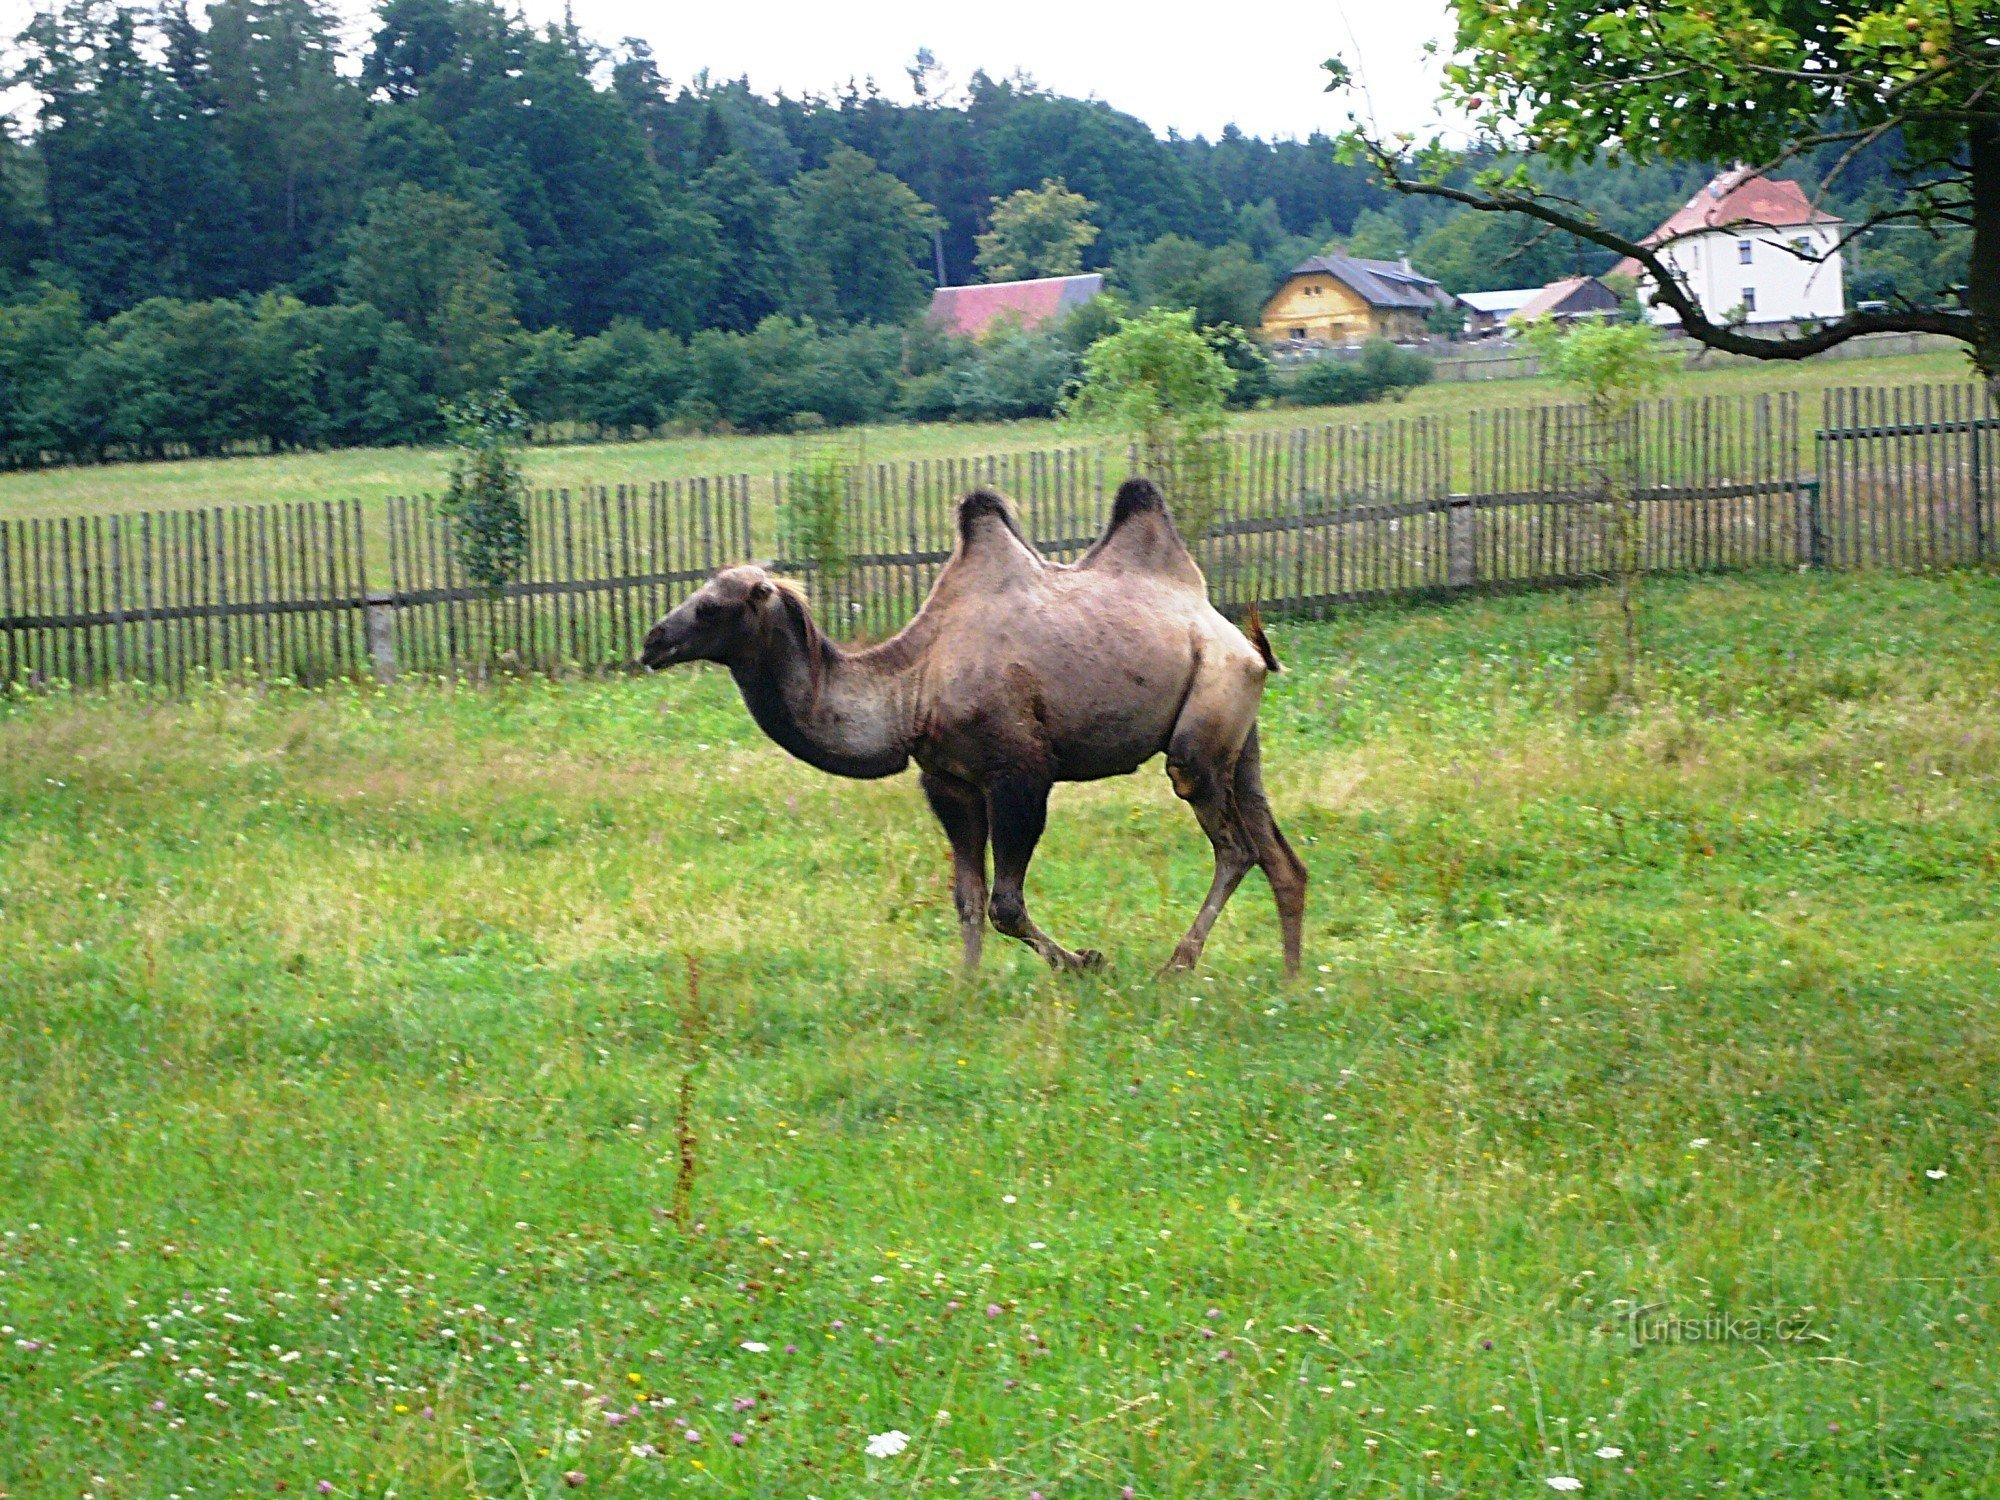 The beginning of camels in Bohemia?